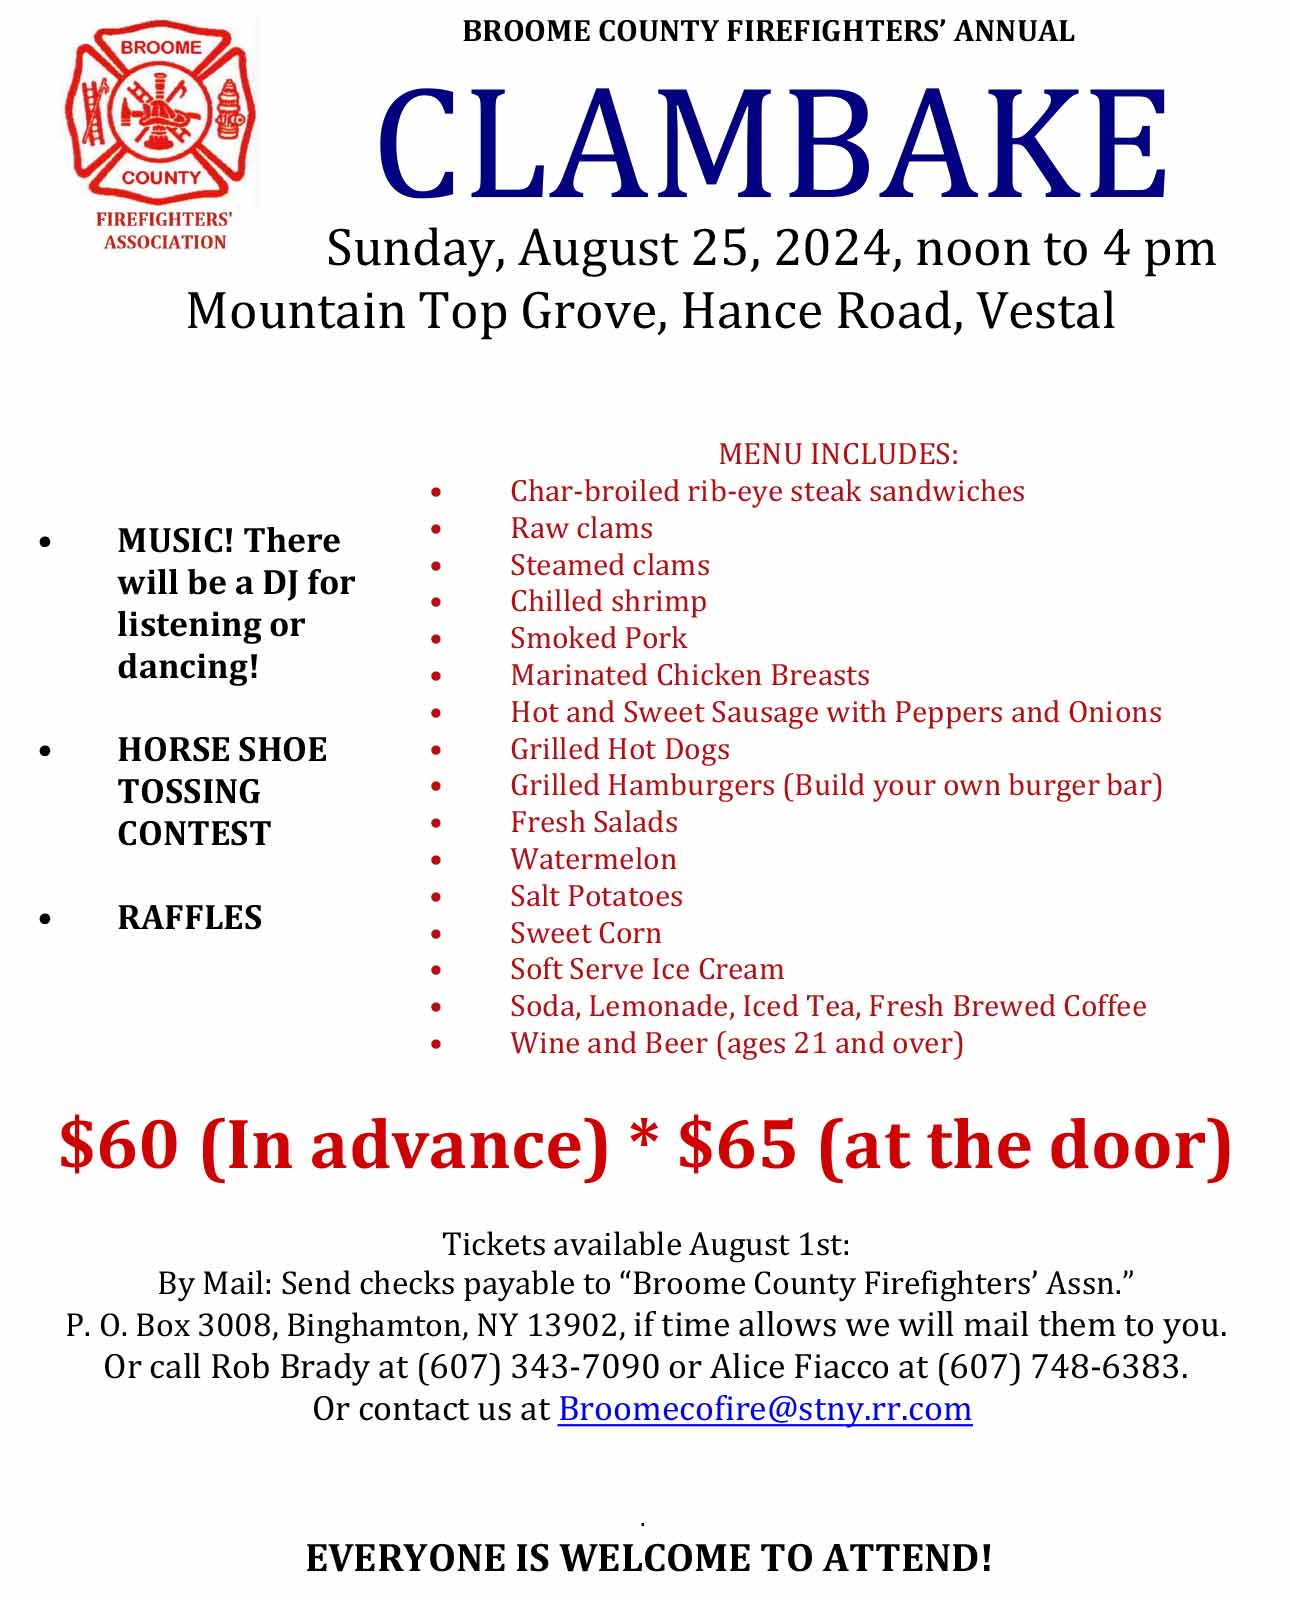 Broome Country Firefighters' Annual Clambake - Sunday, August 25, 2024, Noon to 4 pm